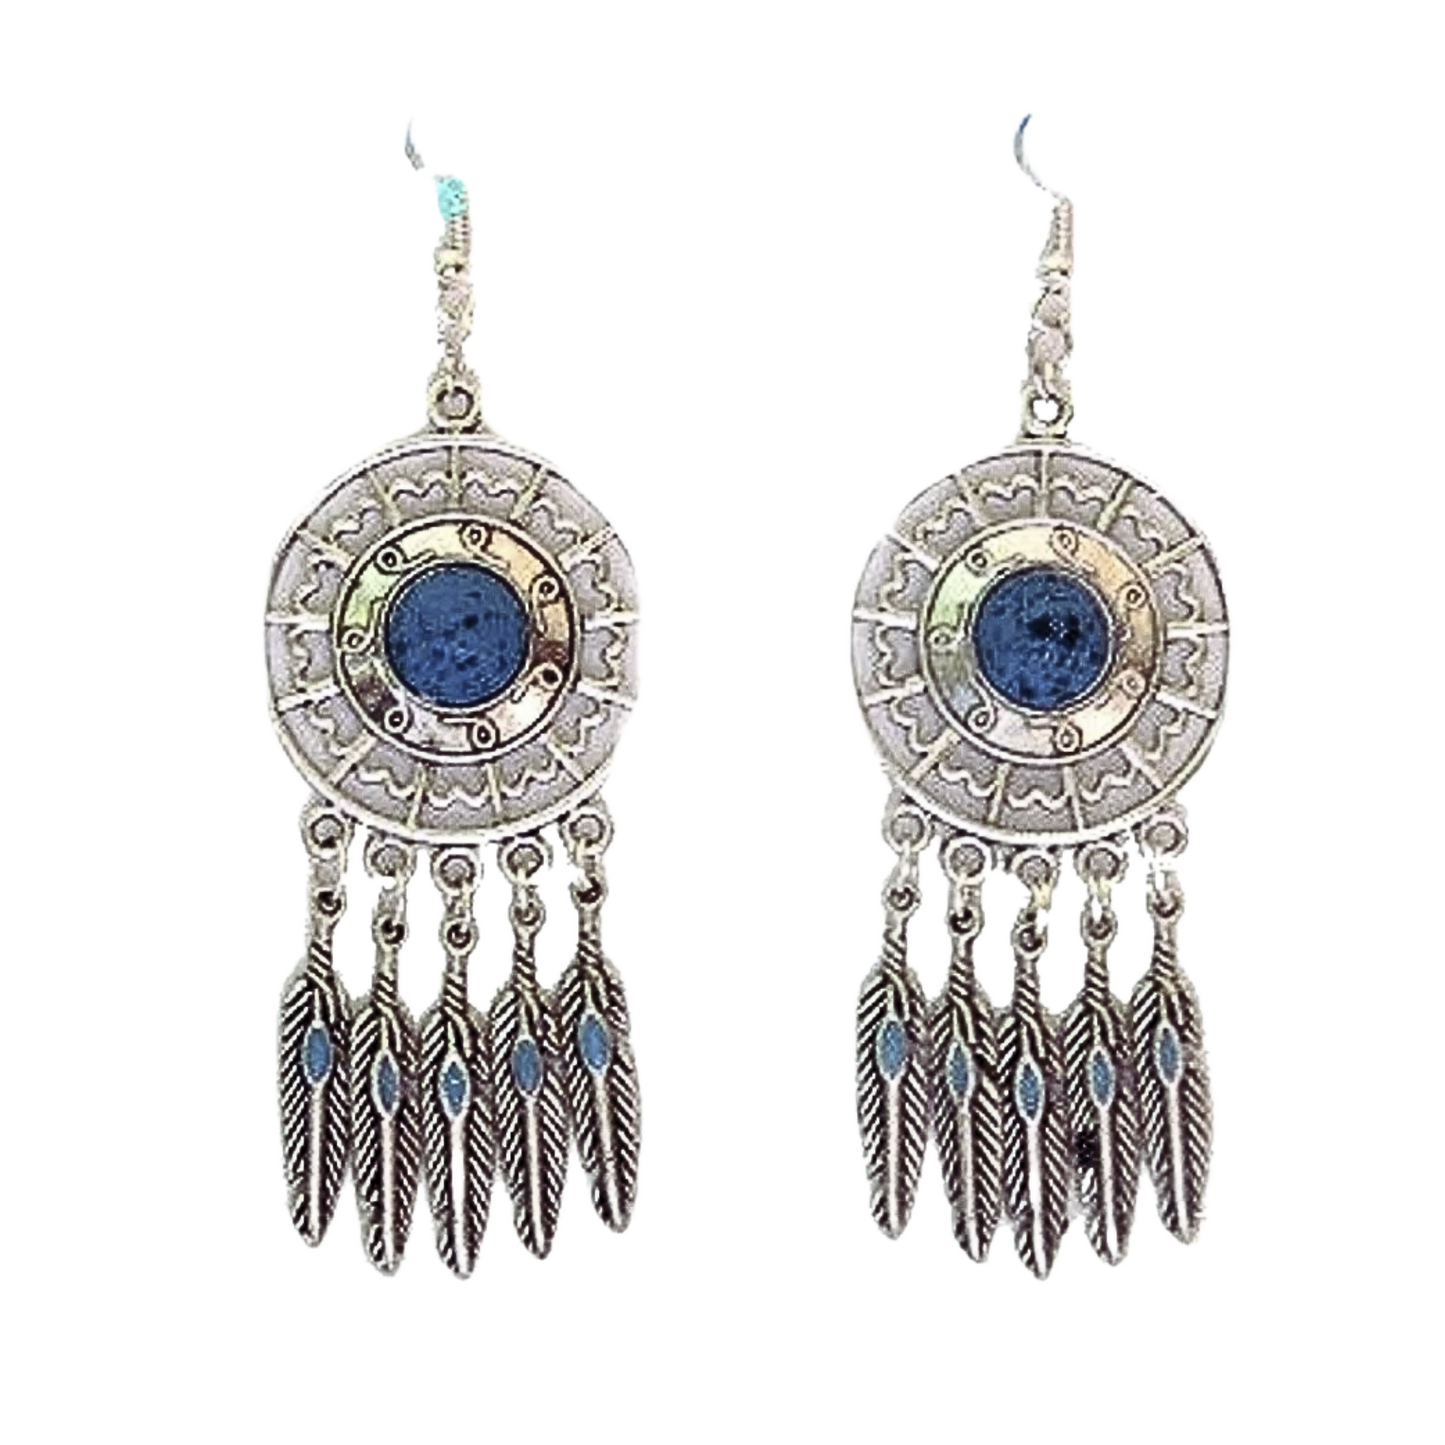 Silver And Blue Dream Catcher Earrings